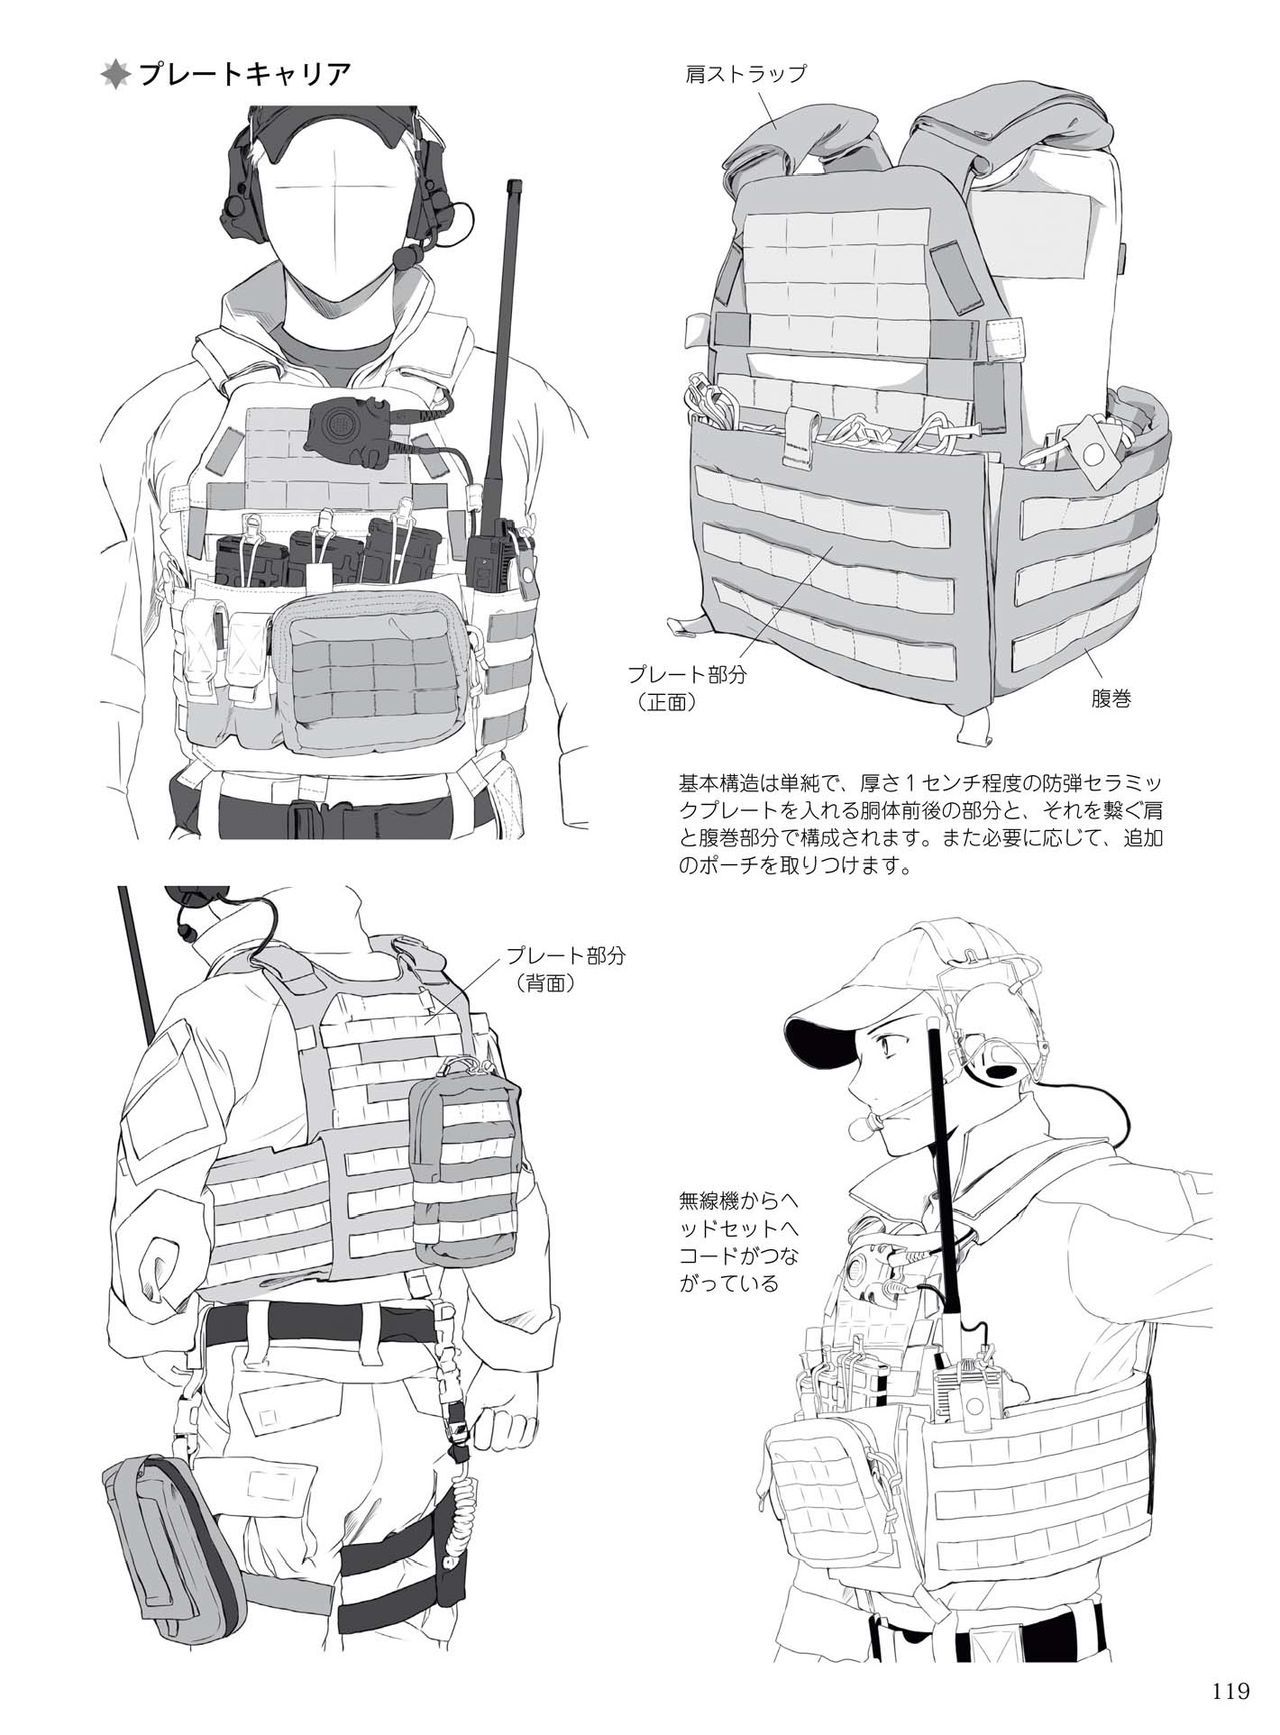 How to draw military uniforms and uniforms From Self-Defense Forces 軍服・制服の描き方 アメリカ軍・自衛隊の制服から戦闘服まで 122